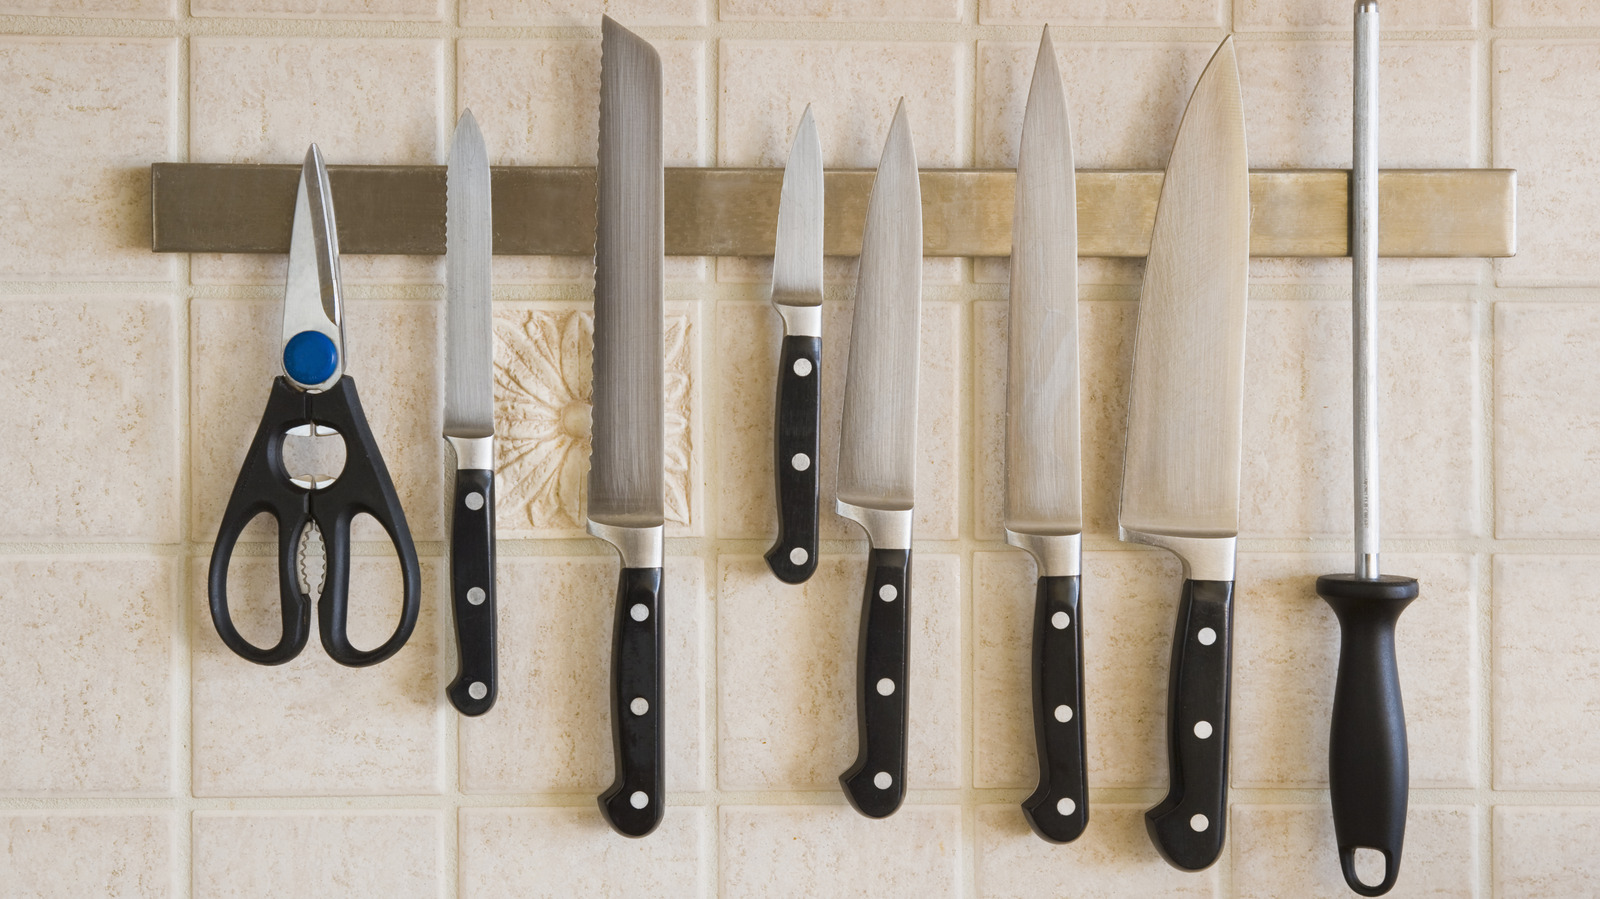 https://www.tastingtable.com/img/gallery/the-clever-knife-storage-hack-you-may-not-have-thought-of/l-intro-1691692092.jpg